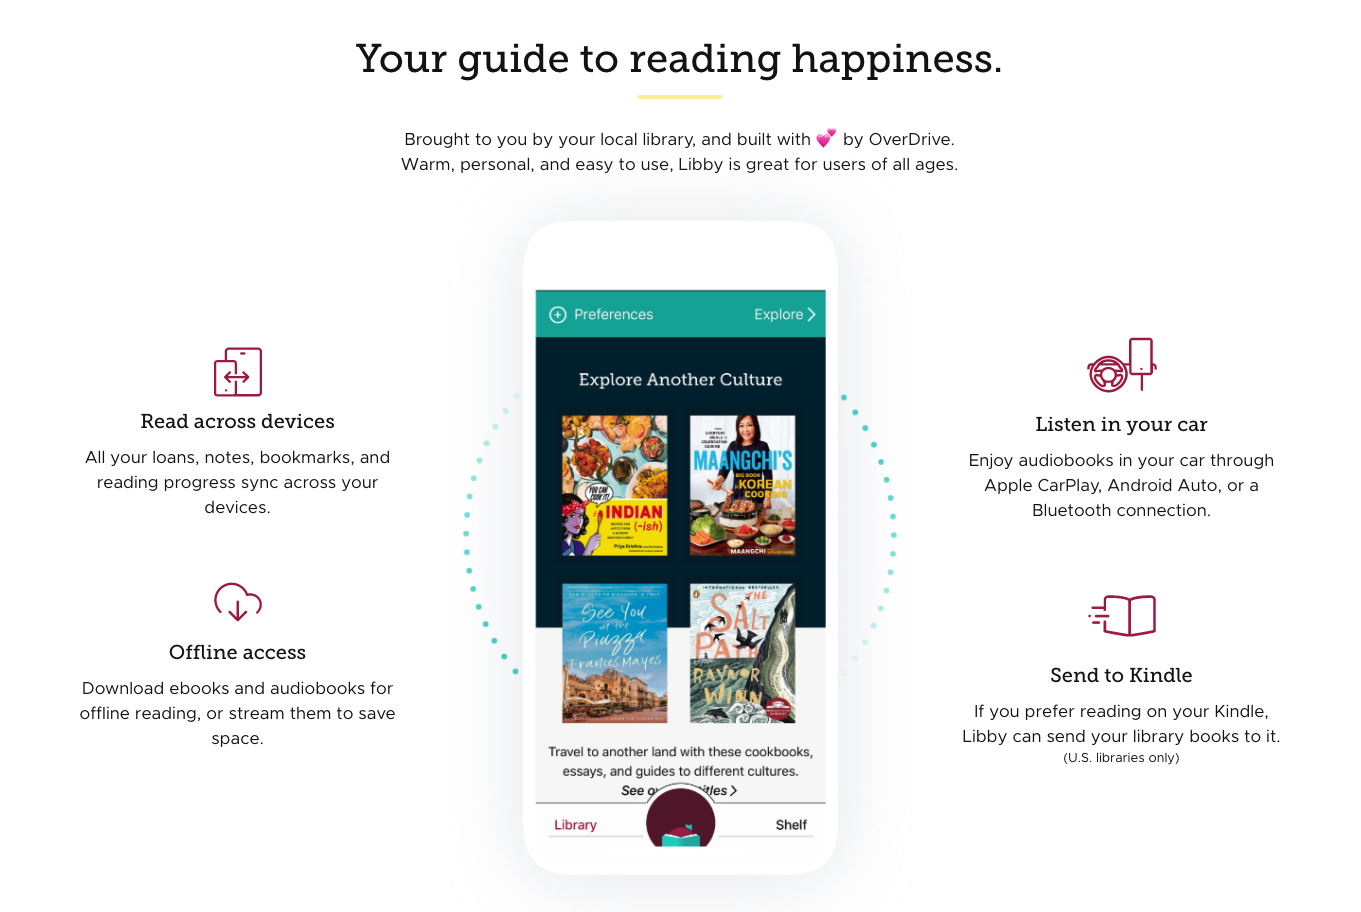 Infographic explaining the benefits of Libby: read across devices, offline access, listen in your car, and send to kindle